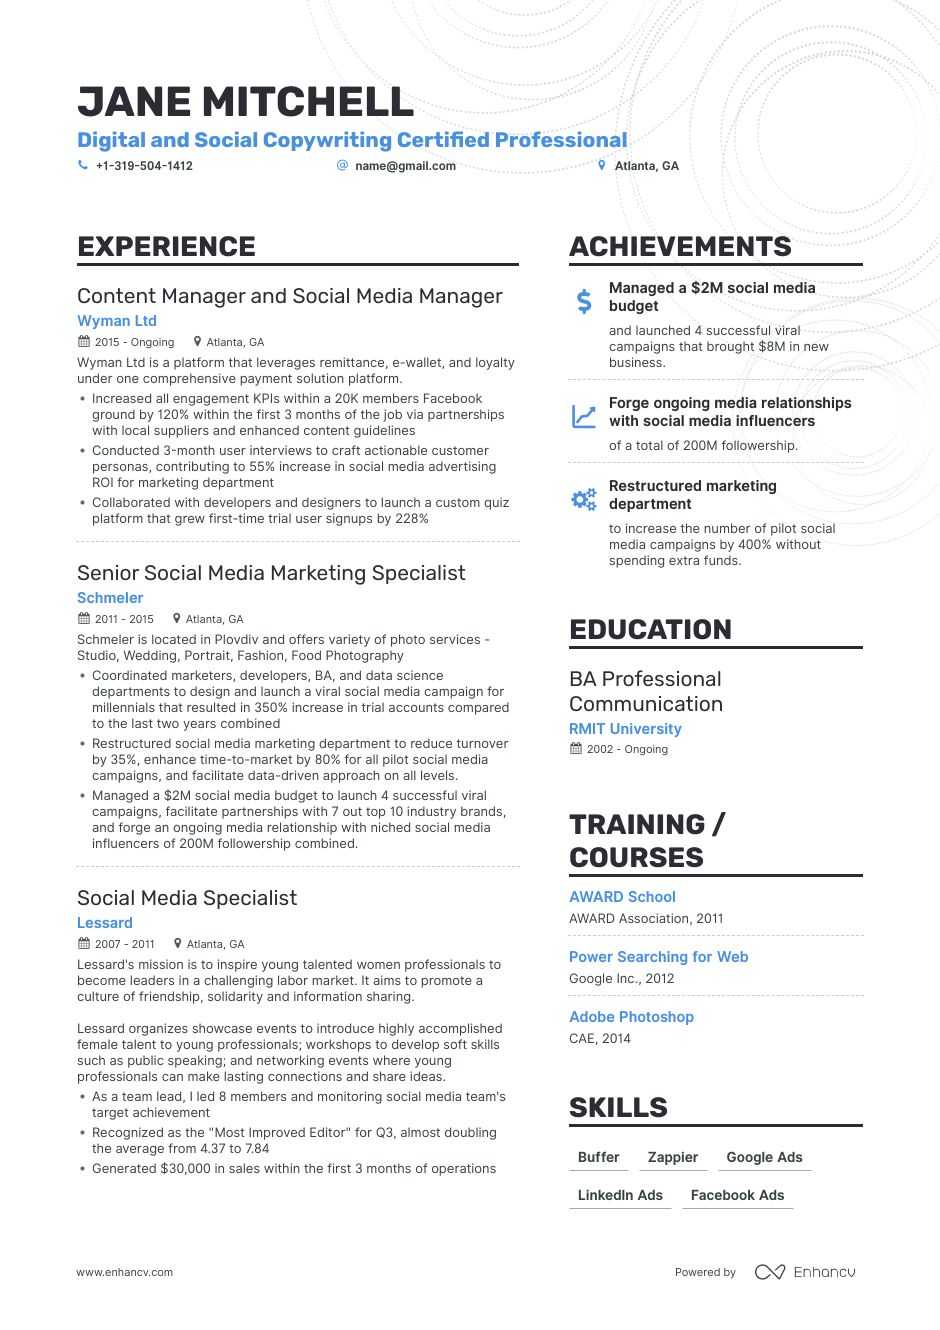 Communication resume examples